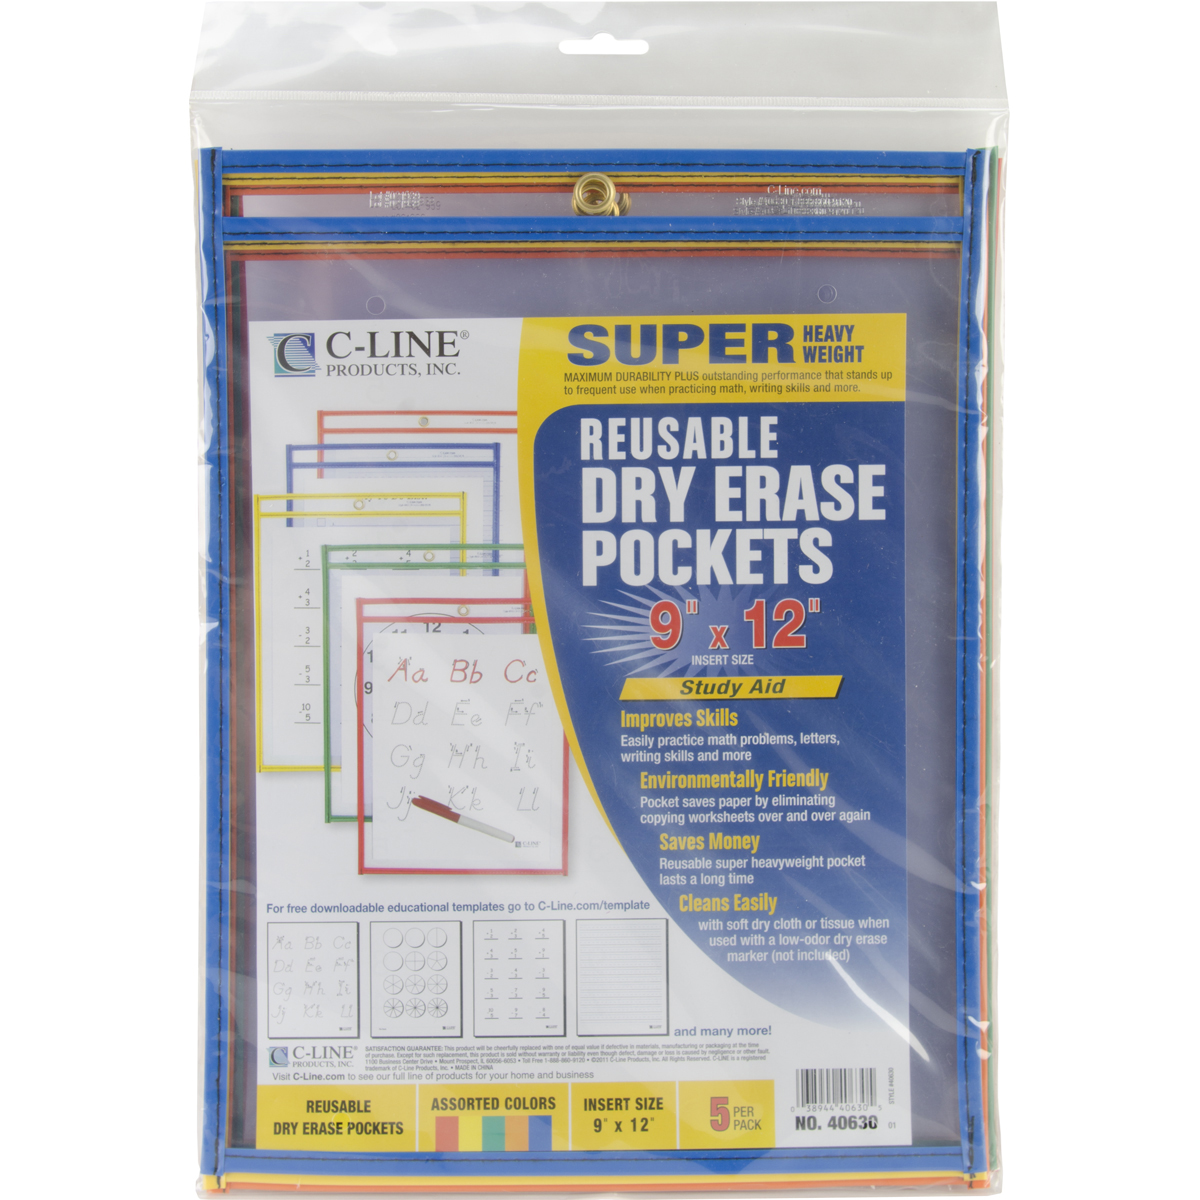 C-Line Reusable Dry Erase Pockets, 9 x 12, Assorted Primary Colors, 5/Pack -CLI40630 - image 1 of 2